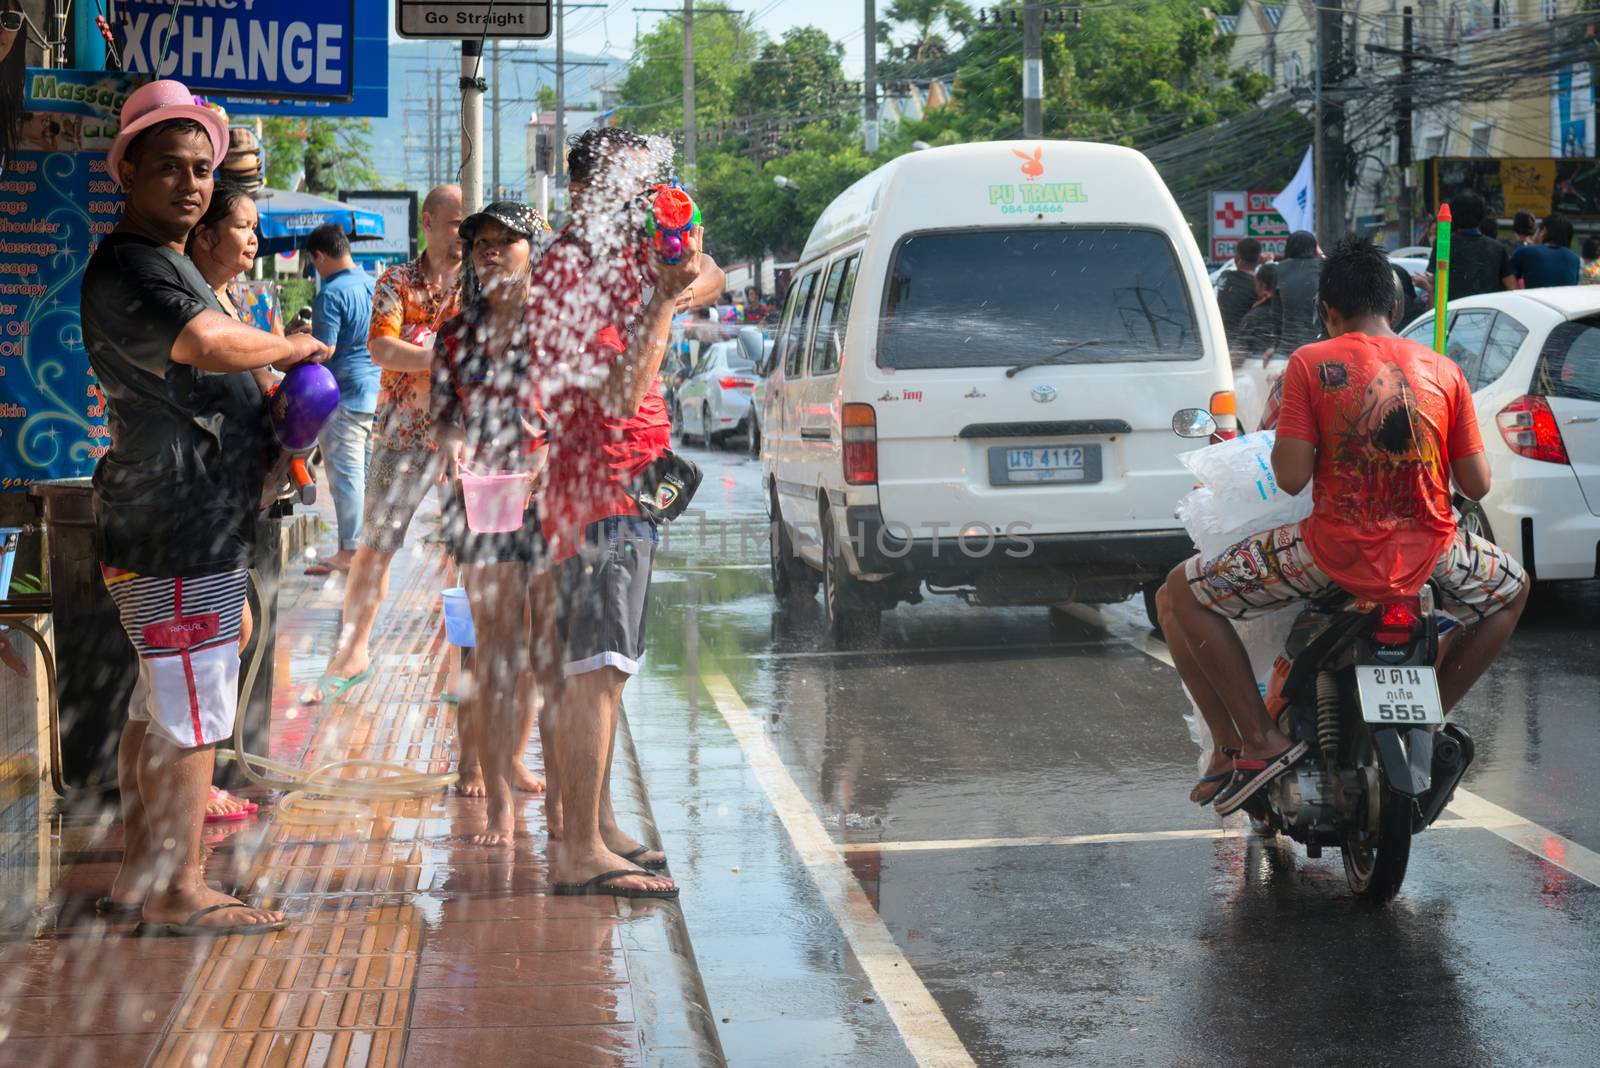 Phuket, Thailand - April 13, 2014: Tourist and residents celebrate Songkran Festival, the Thai New Year by splashing water to each others on Patong streets. 